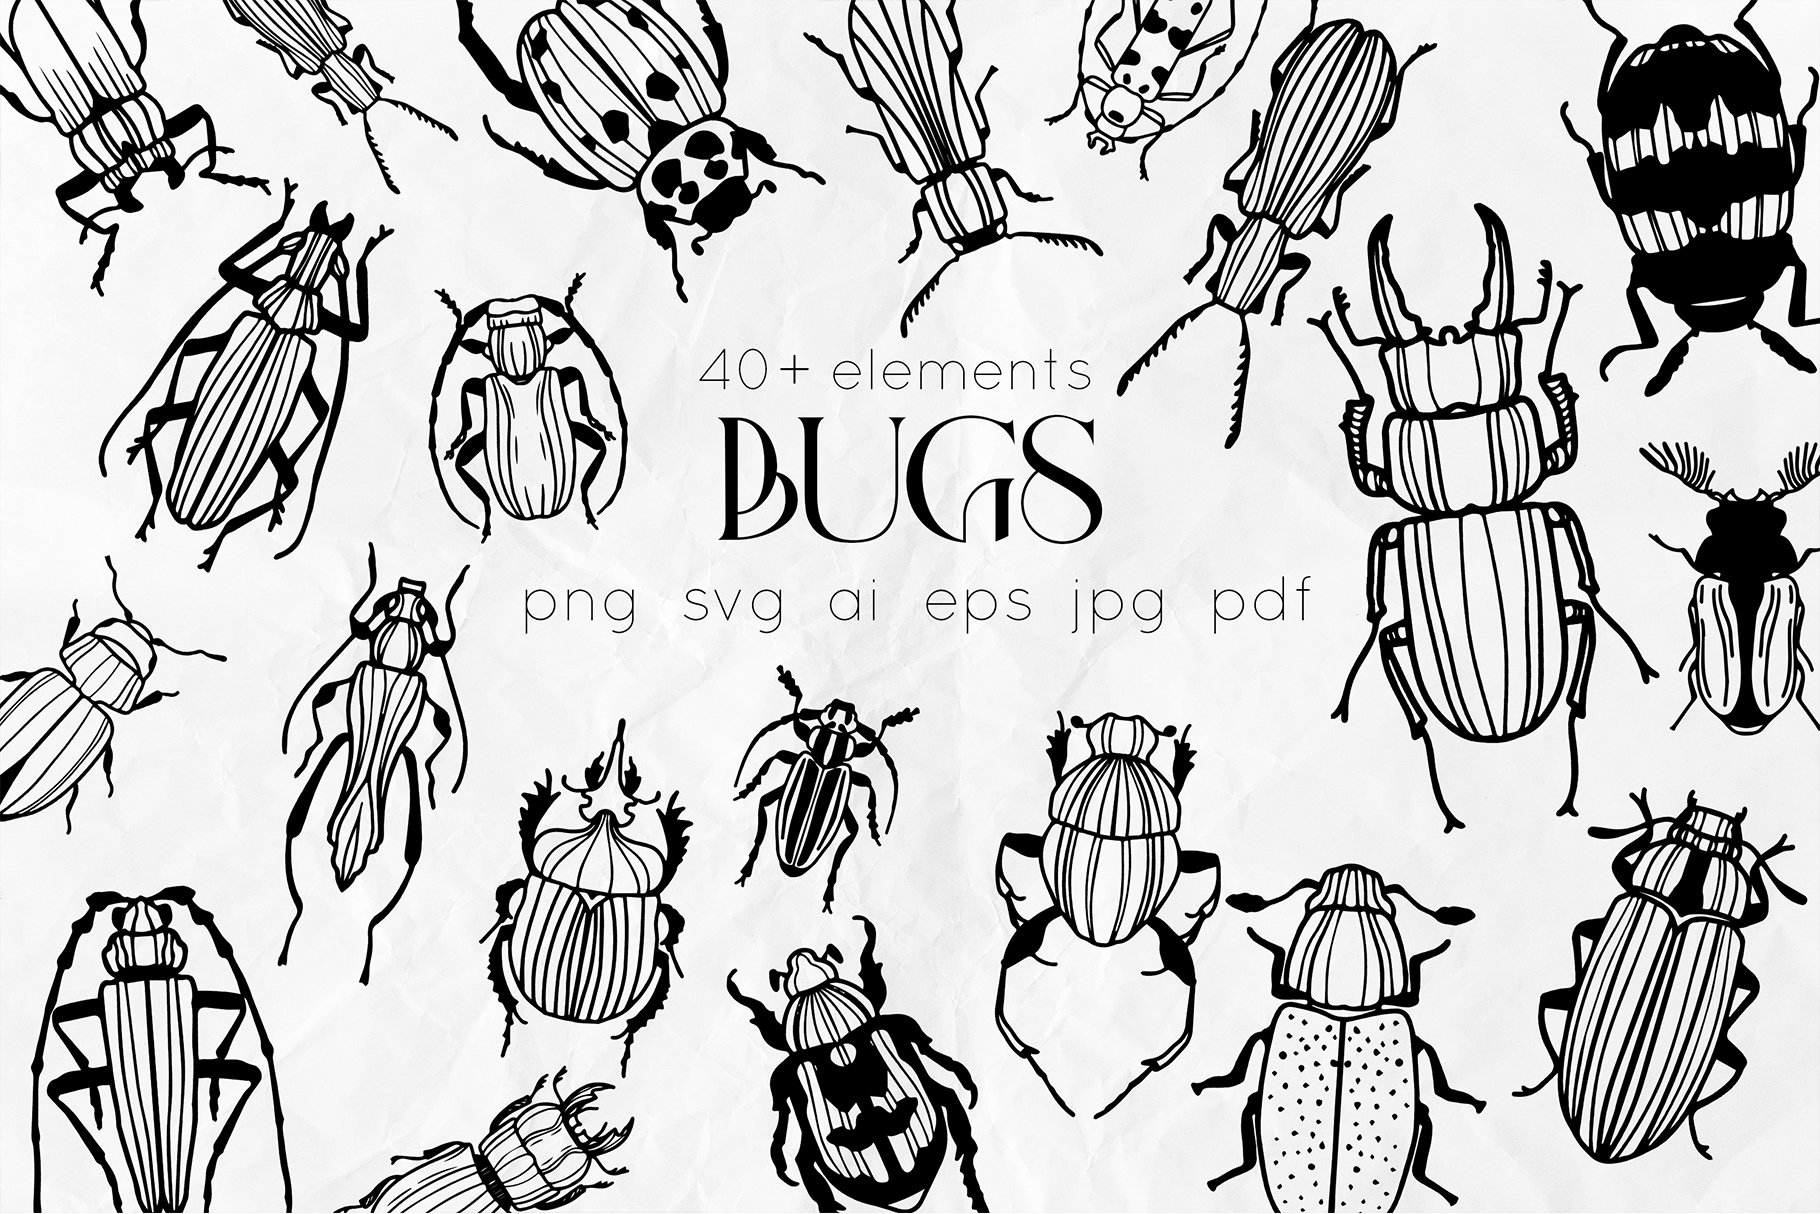 Bugs Line Art Vector SVG cover image.